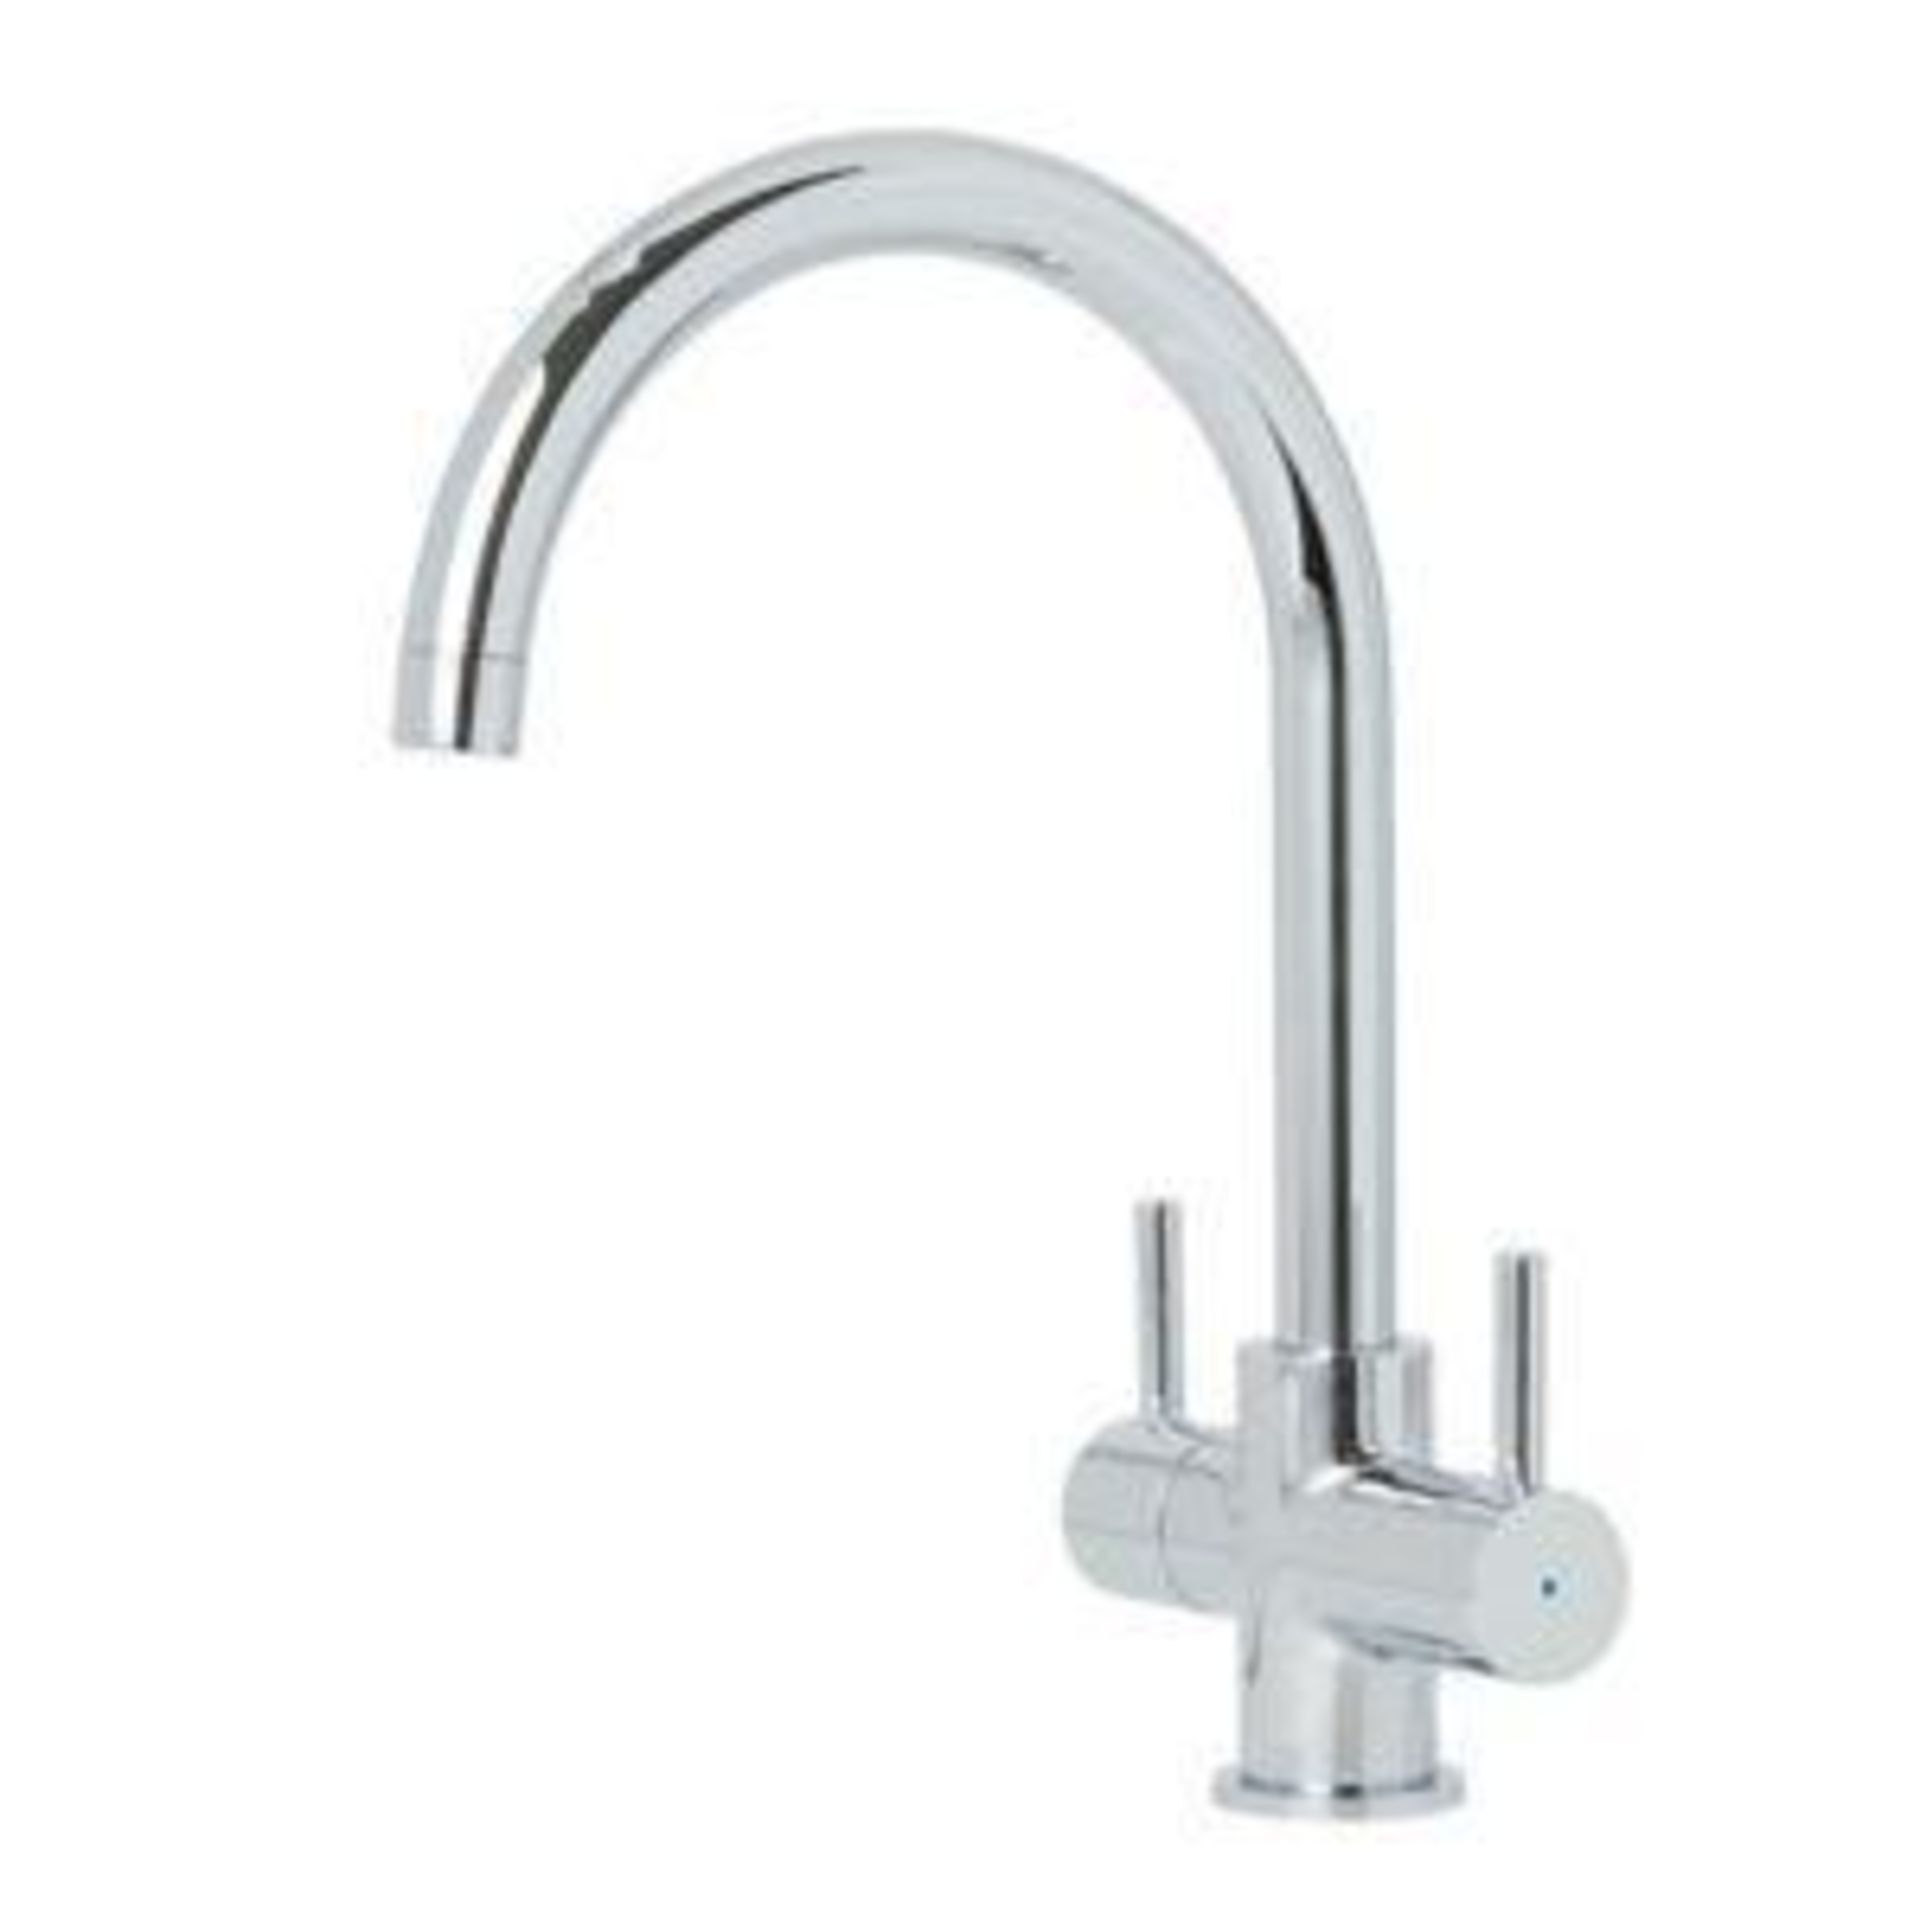 2 x Cooke & Lewis Amsel Chrome Effect Kitchen Twin Lever Tap - ER49. Cooke & Lewis Amsel Chrome